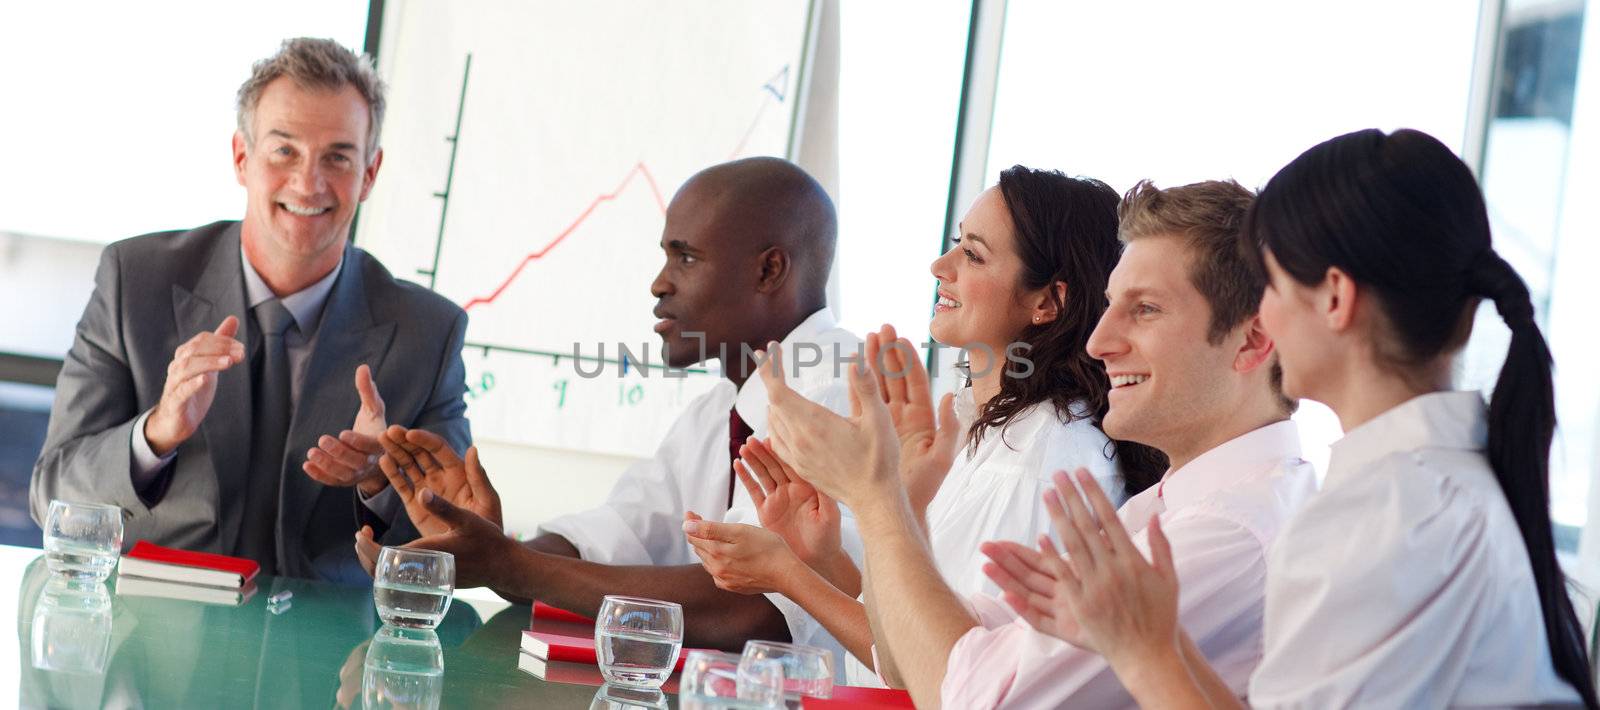 Business people clapping in a meeting by Wavebreakmedia